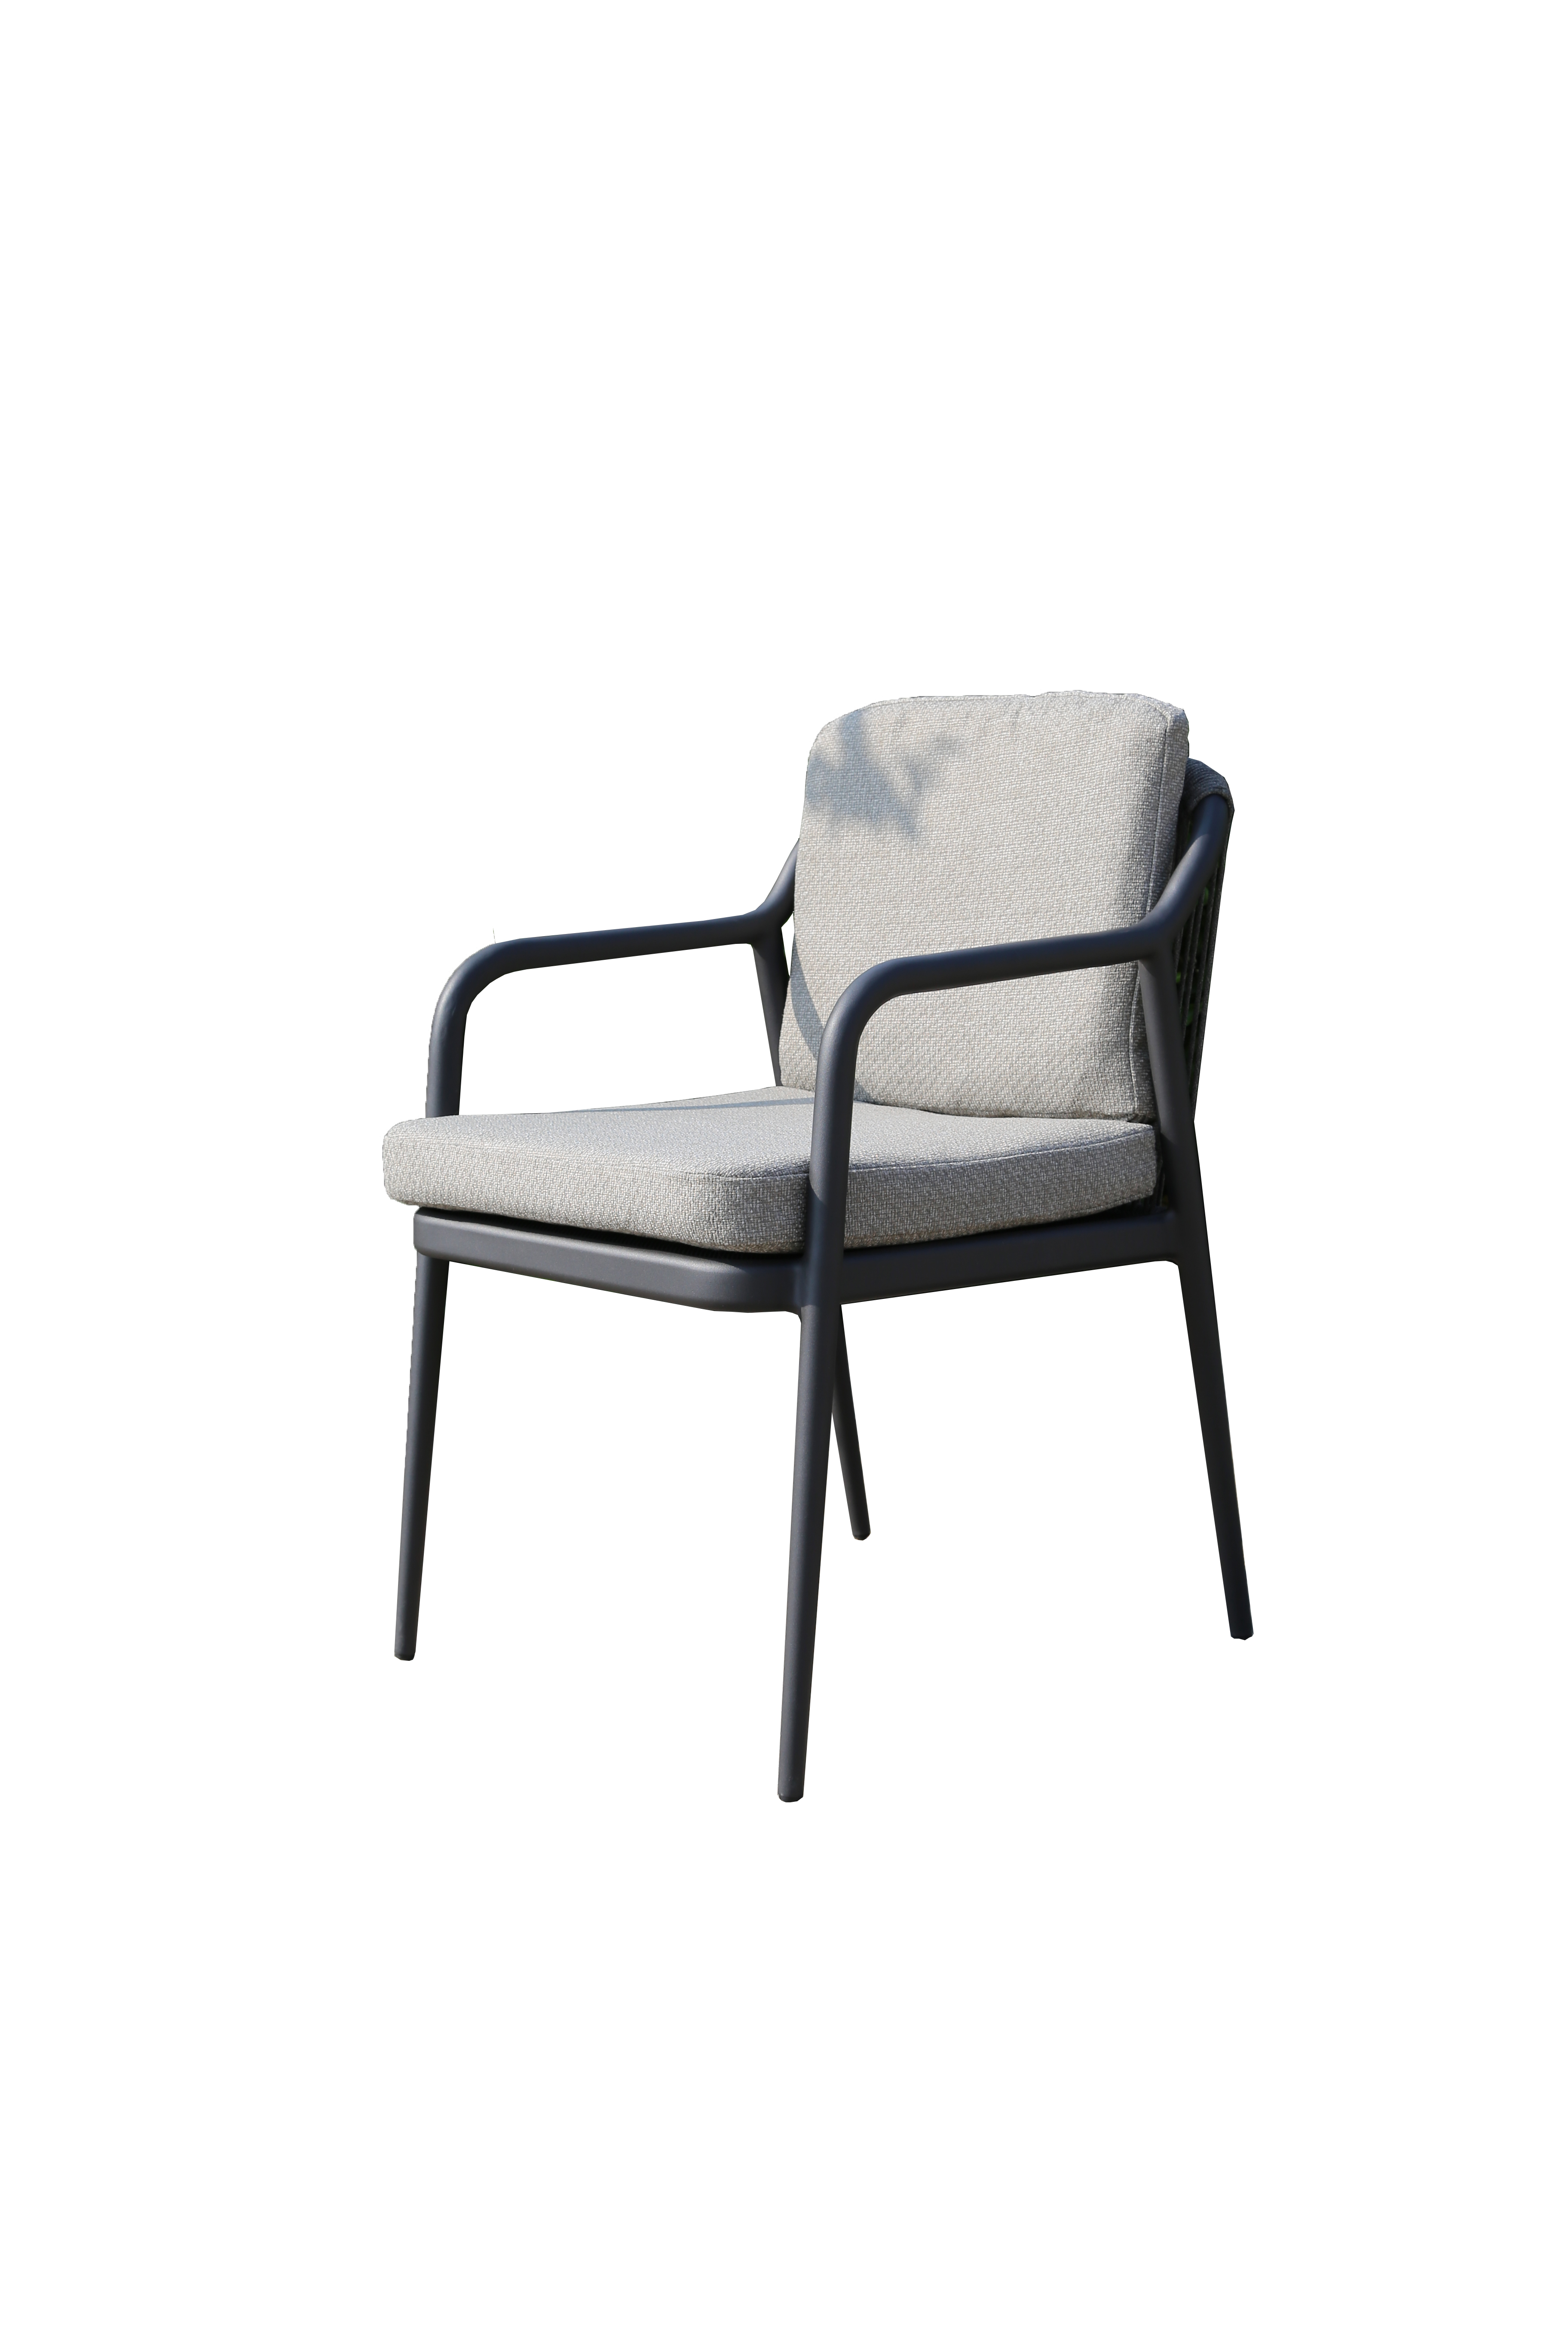 Balcony set of 3,Up One Valenzia dining chair